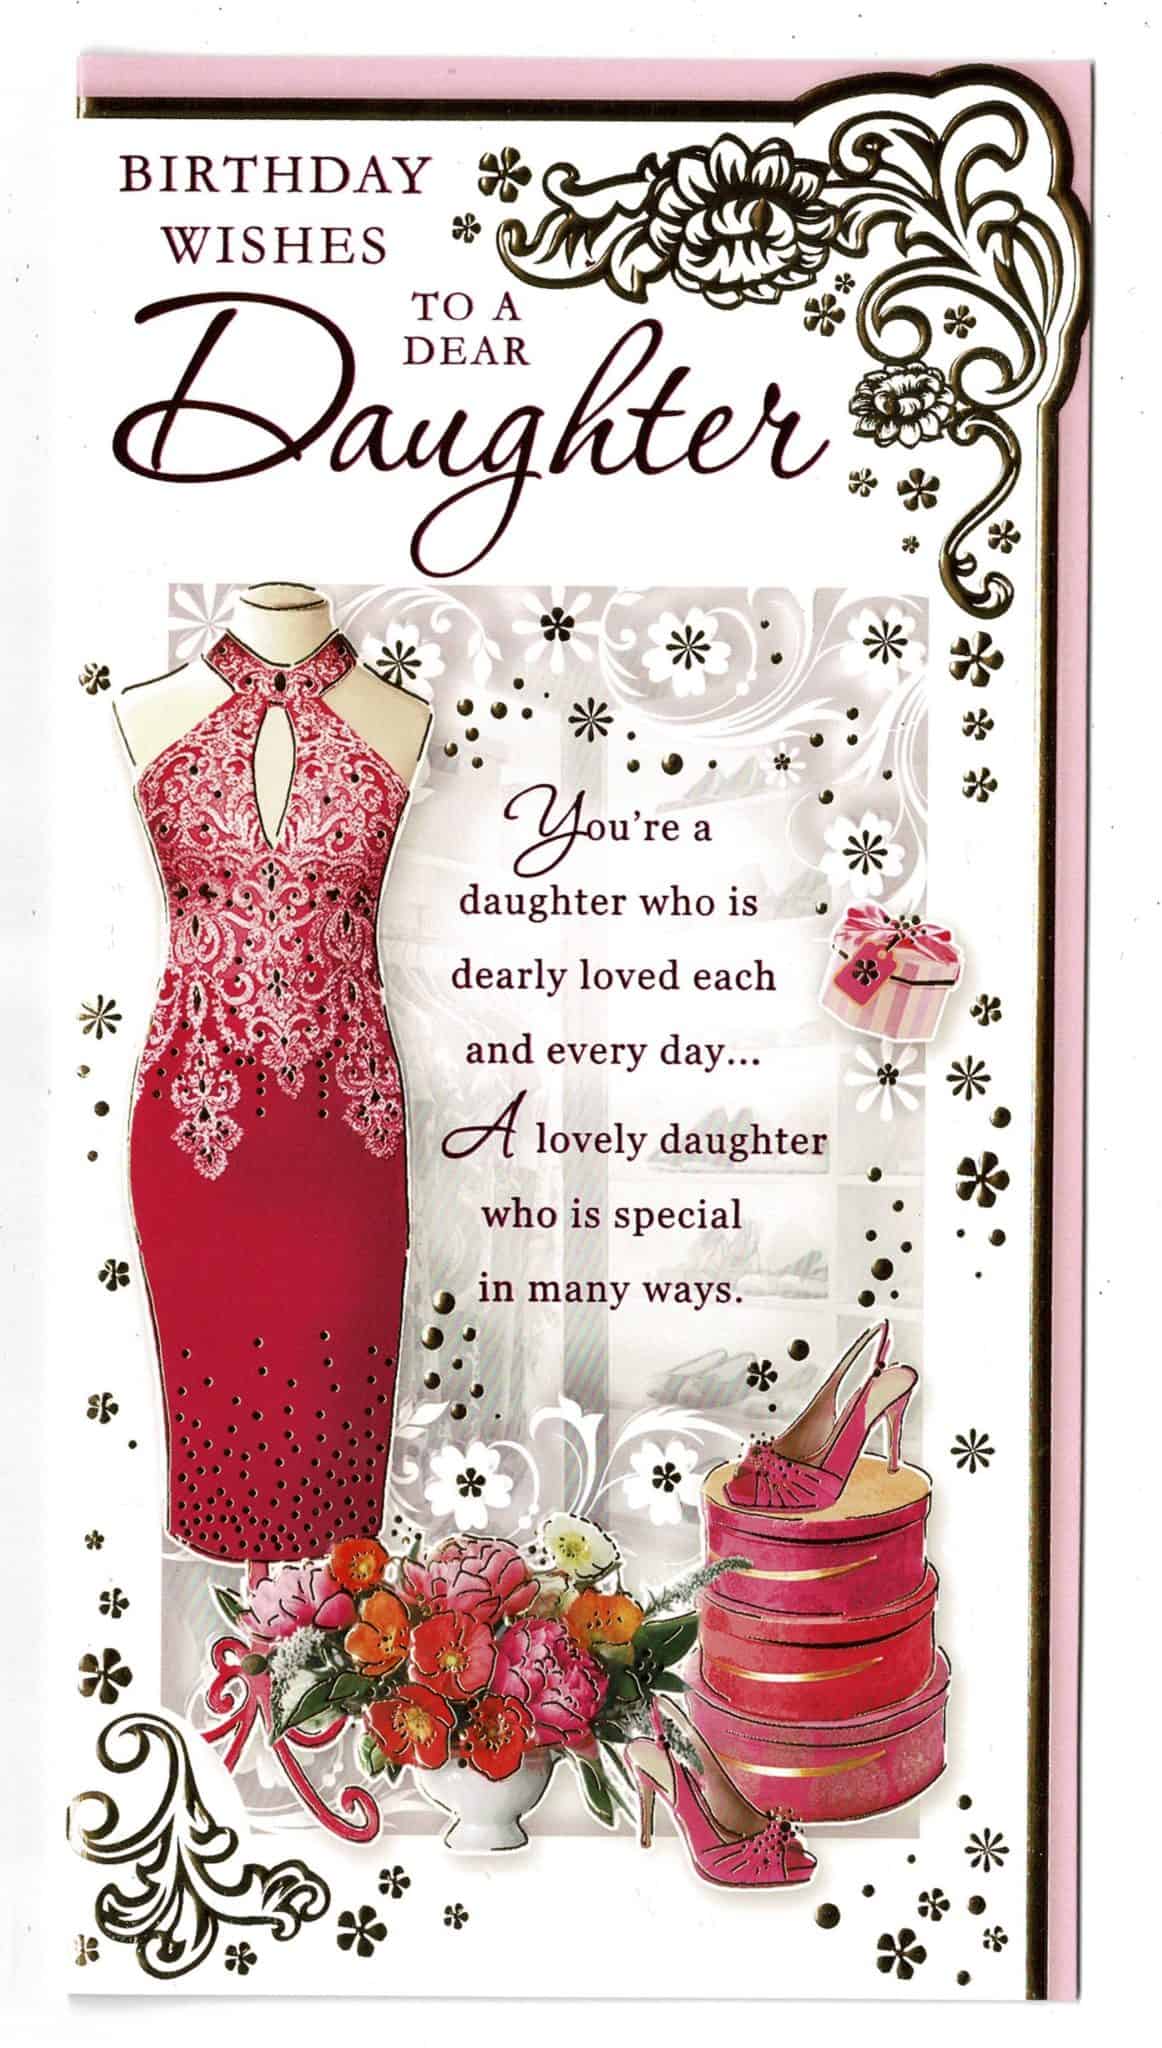 daughter-birthday-card-with-sentiment-verse-birthday-wishes-to-a-dear-daughter-with-love